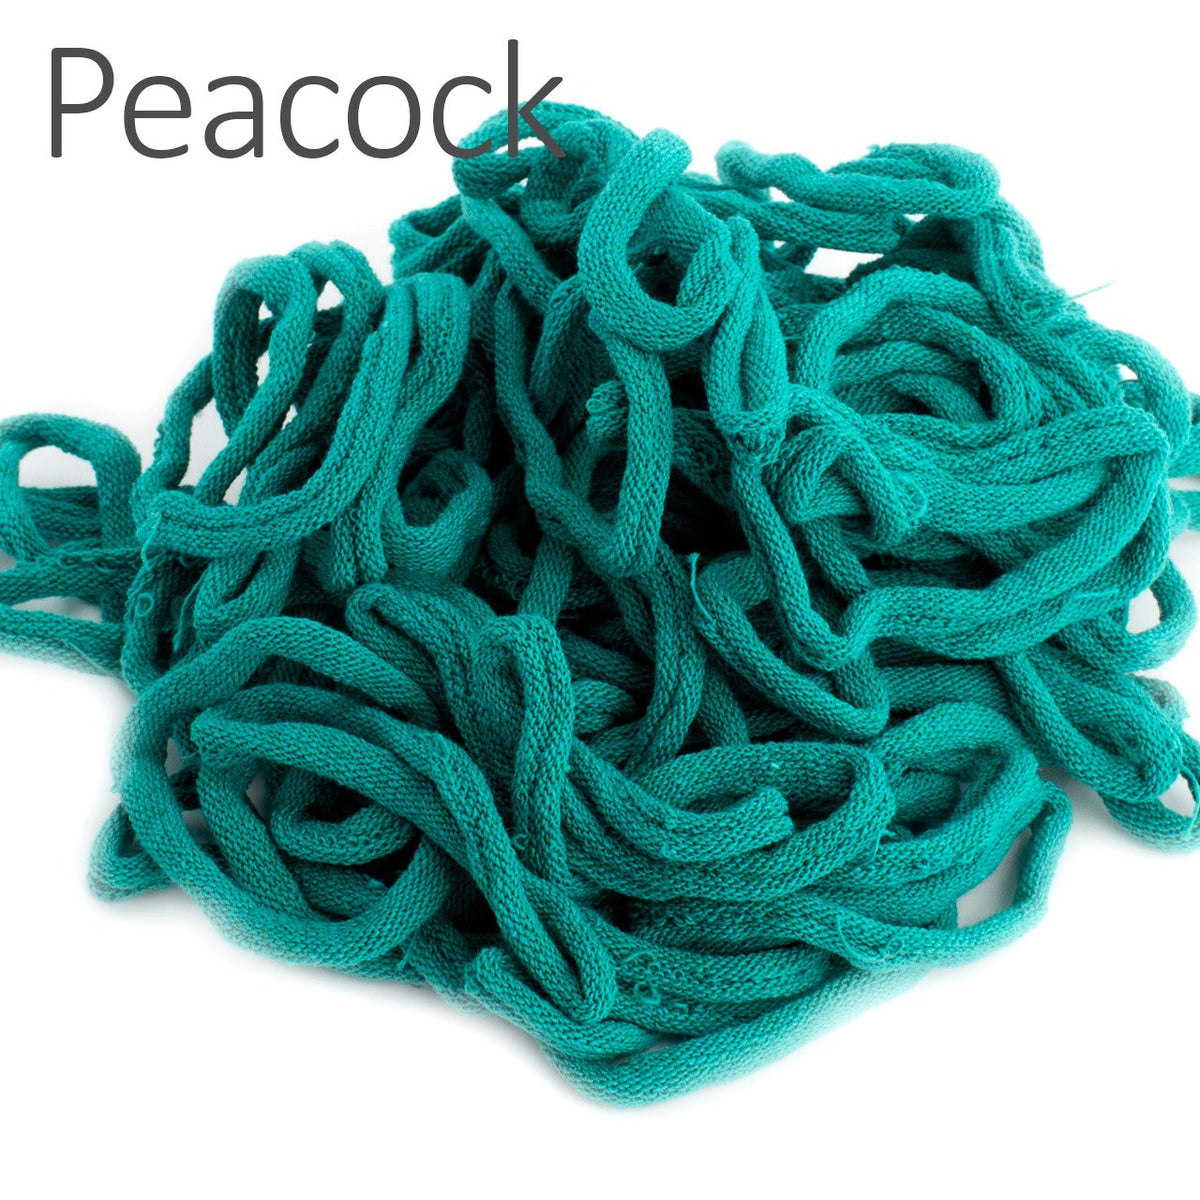 Pro Cotton Loops Peacock